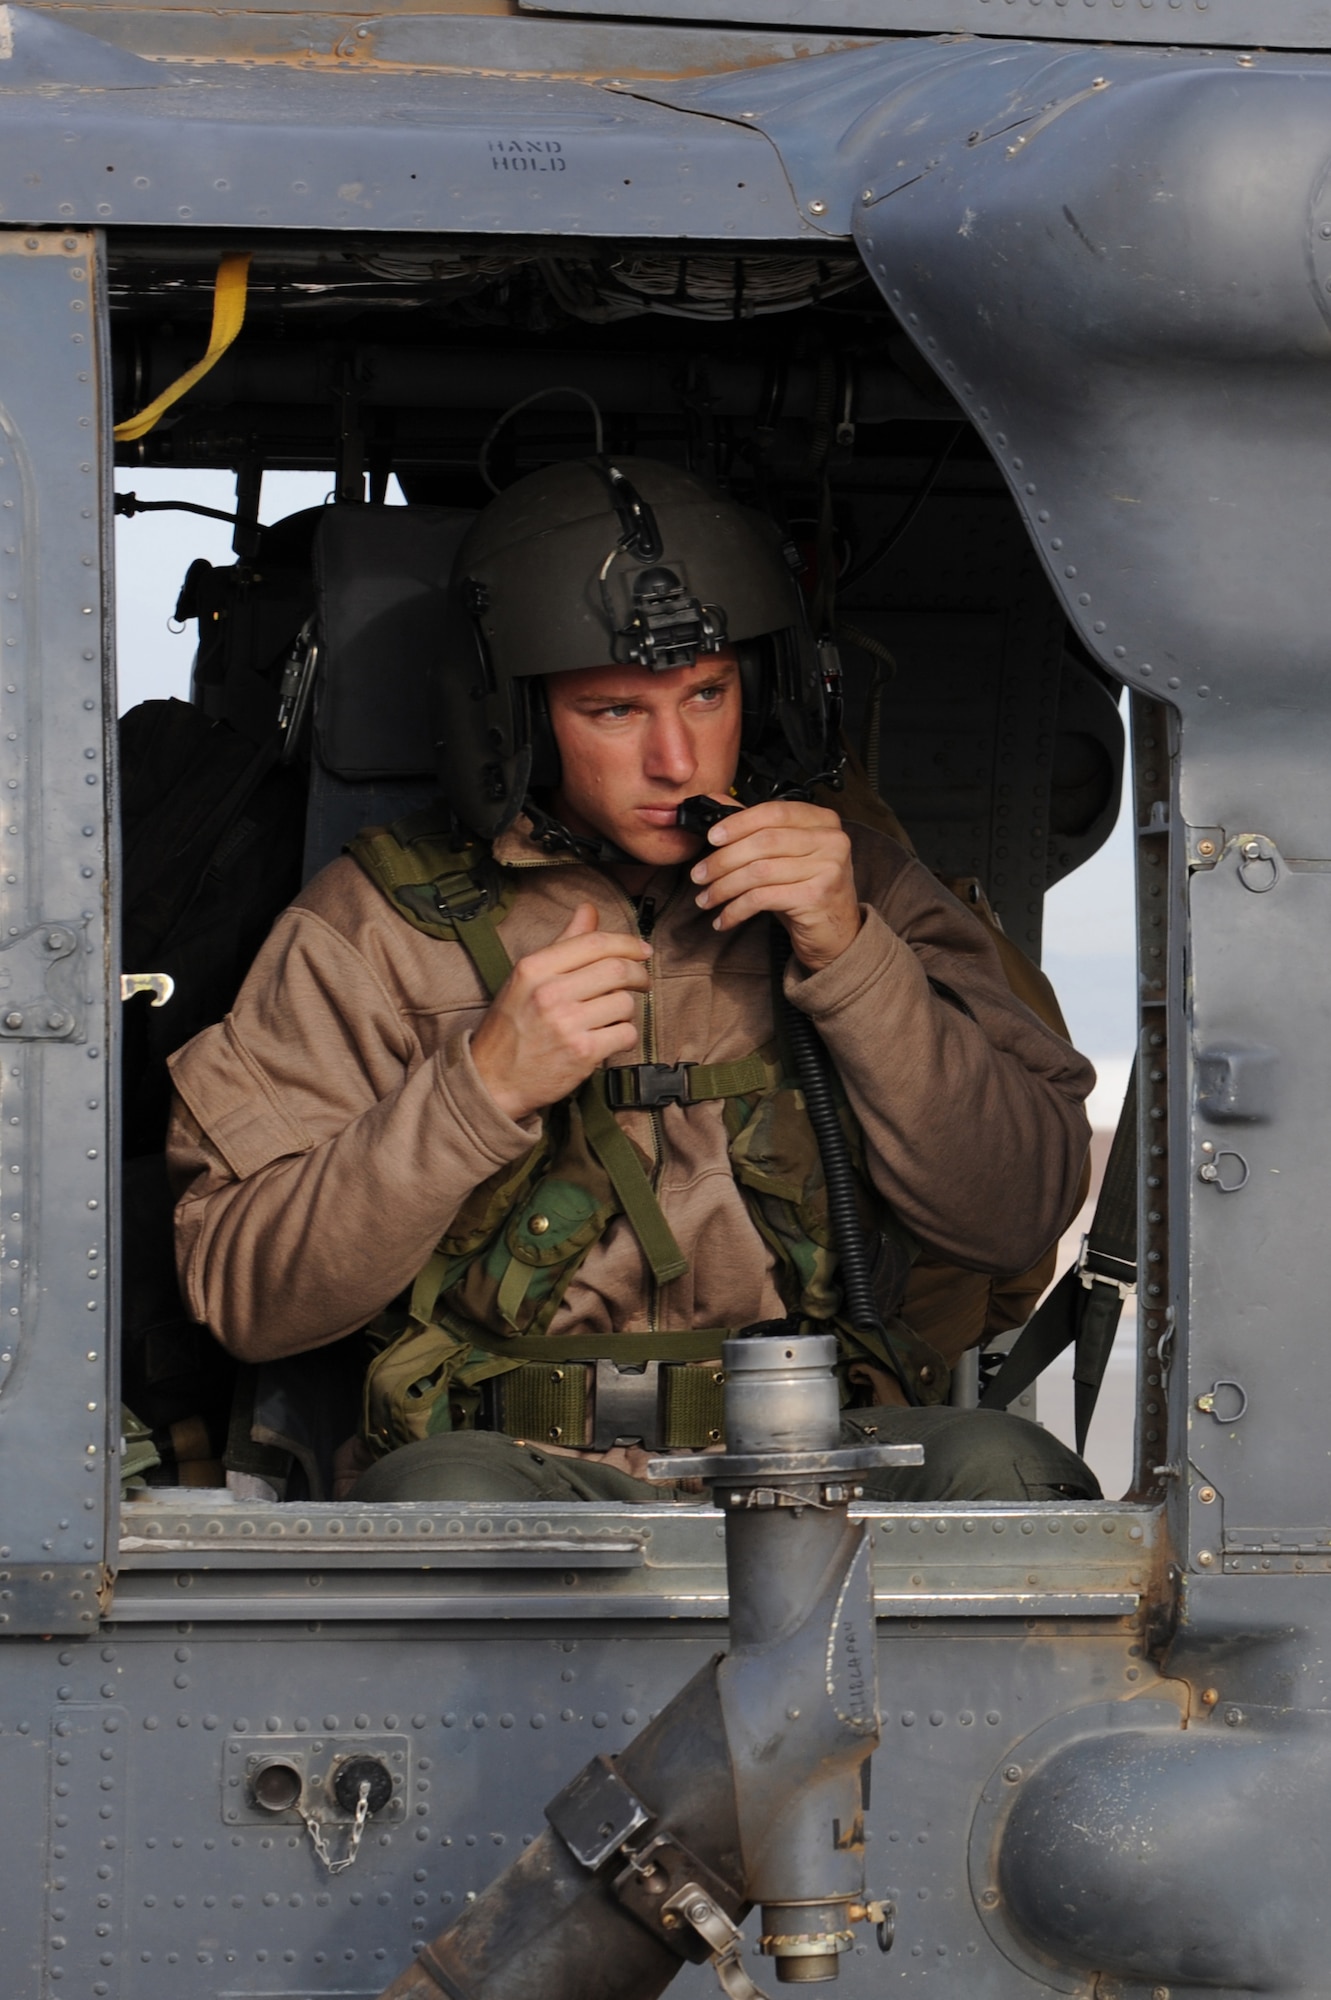 Staff Sgt. Johann Schultz makes final adjustments to his helmet prior to departing for a rescue mission May 1 at Nellis Air Force Base, Nev. Four helicopters and 24 Airmen from the 58th and 66th Rescue Squadrons deployed to assist in the search for a pilot and passenger who were aboard a motorized sailplane that disappeared from radar April 24 in the Sierra Nevada Mountain Range near Mammoth Lakes, Calif. Sergeant Schultz is an an HH-60G aerial gunner with the 66th Rescue Squadron. (U.S. Air Force photo/Senior Airman Nadine Y. Barclay)
